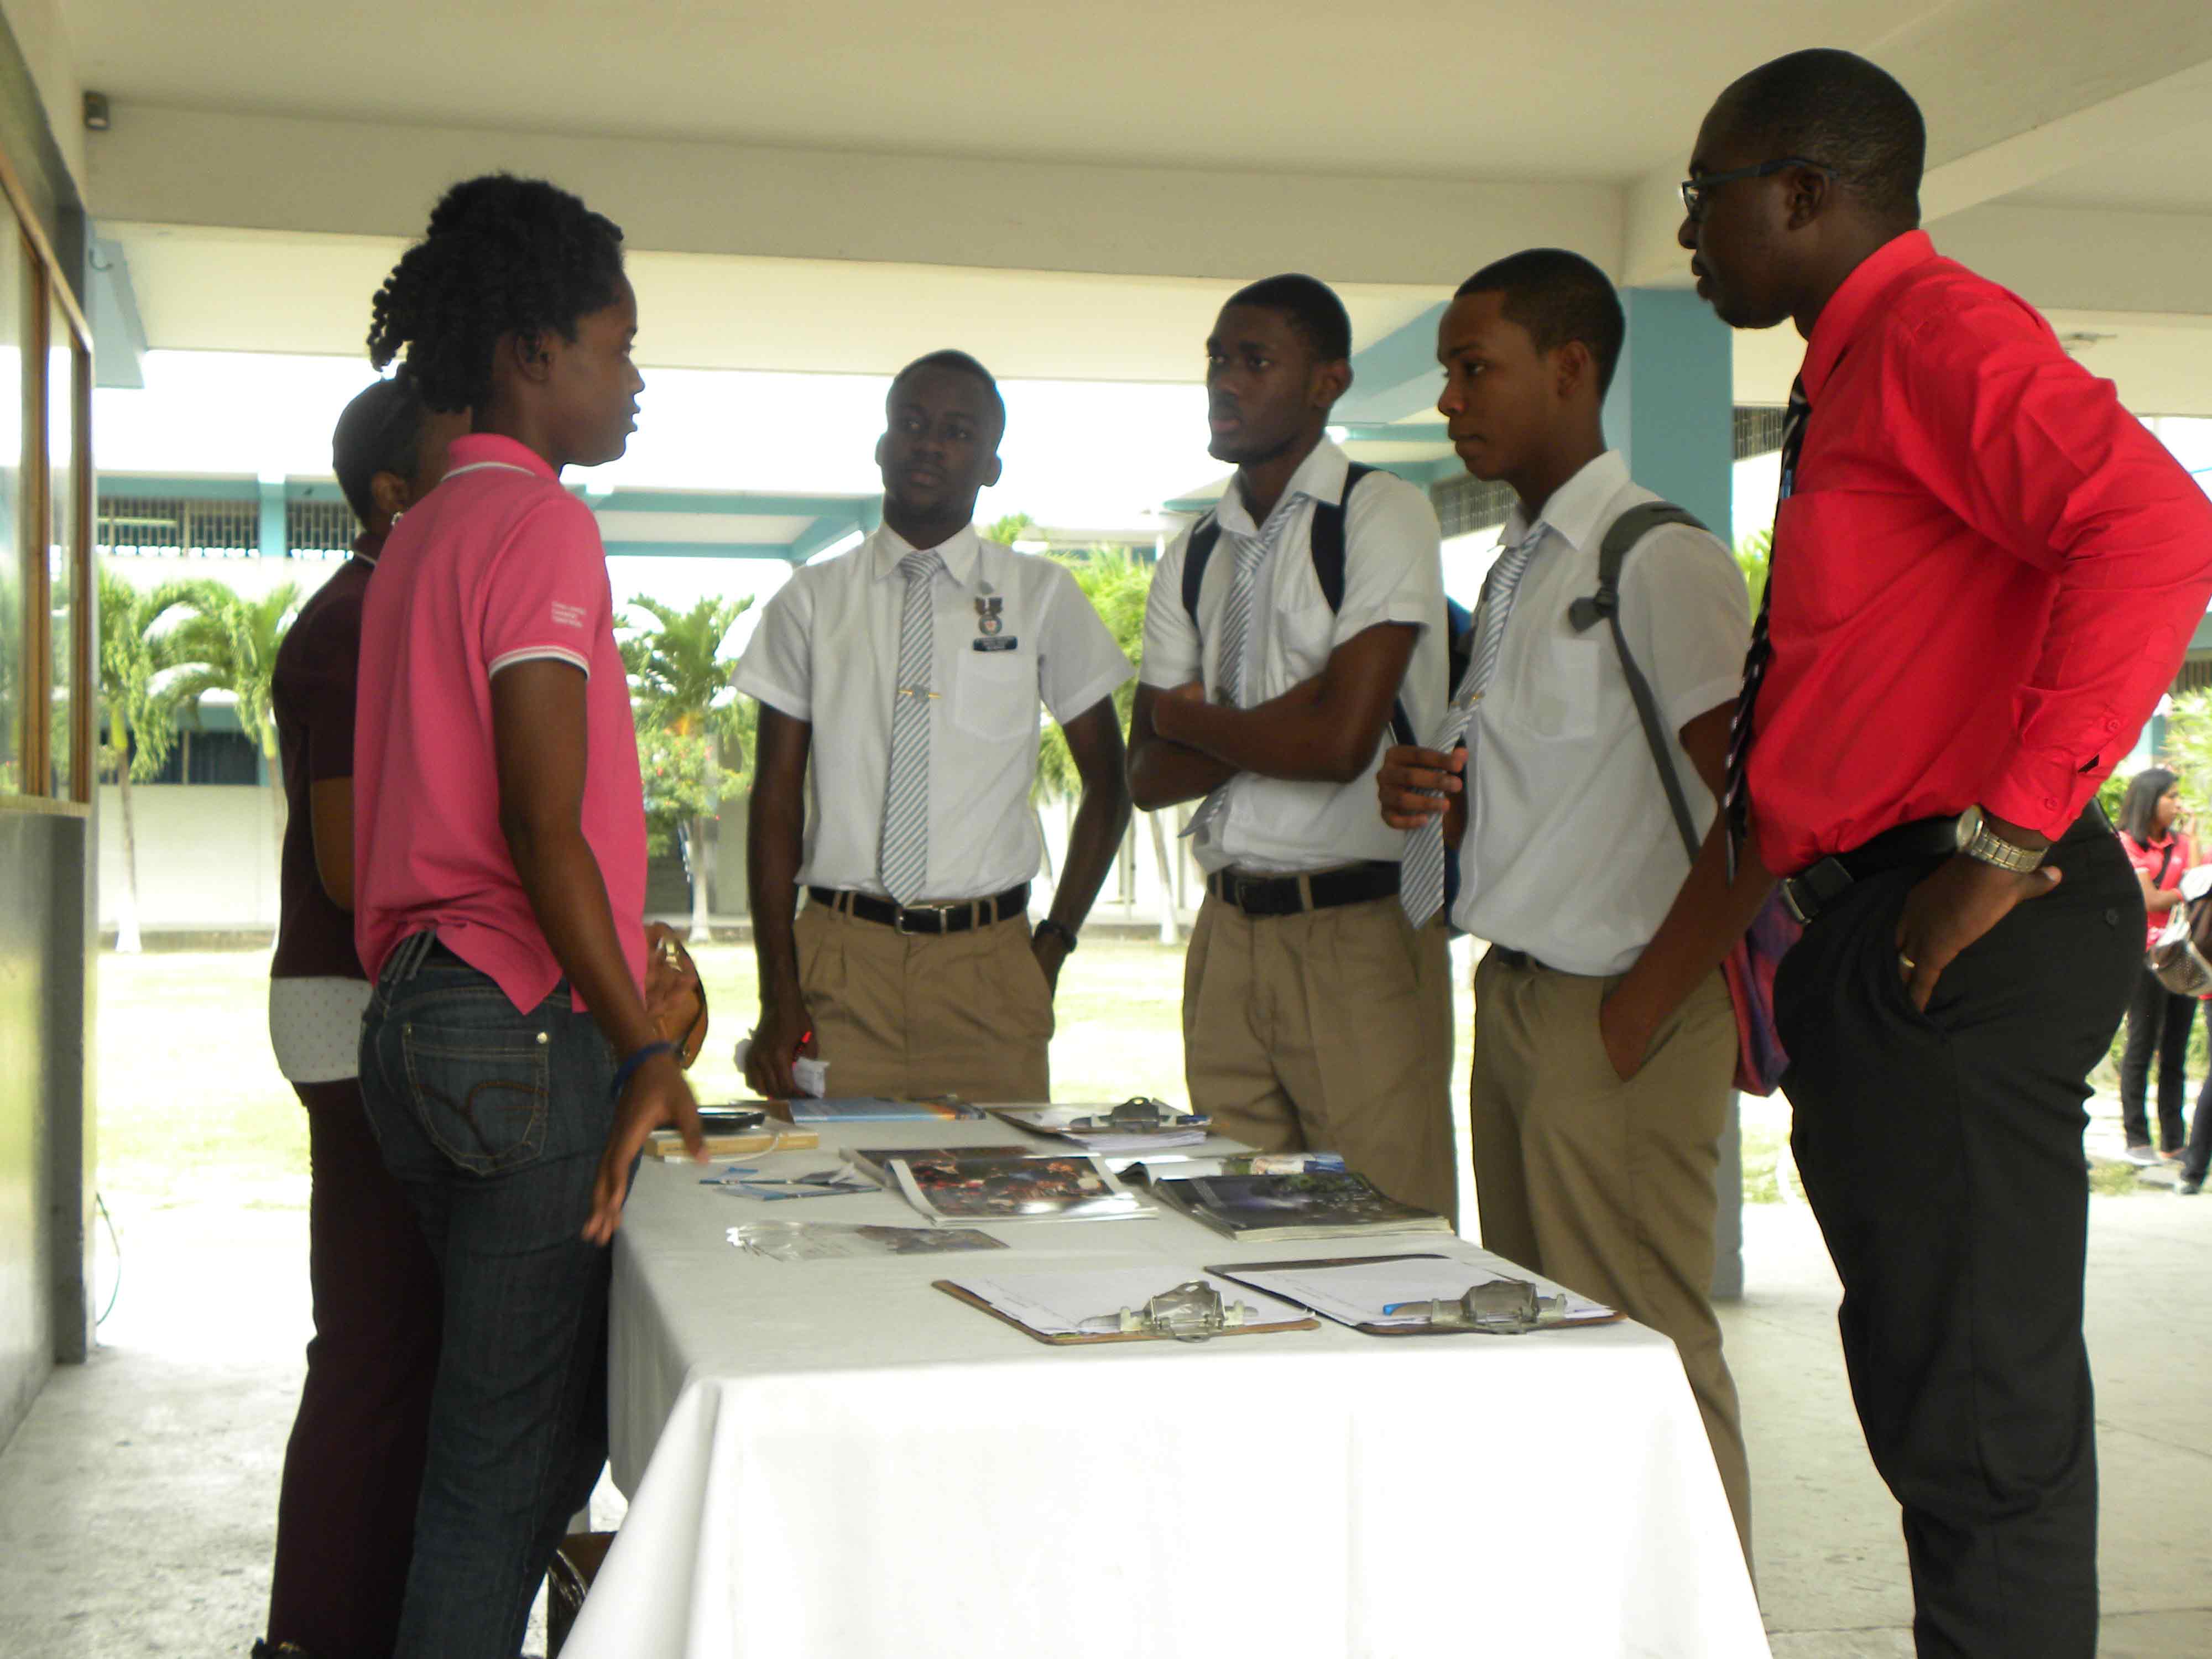 Students flock the promotion table to learn how to join the IYF